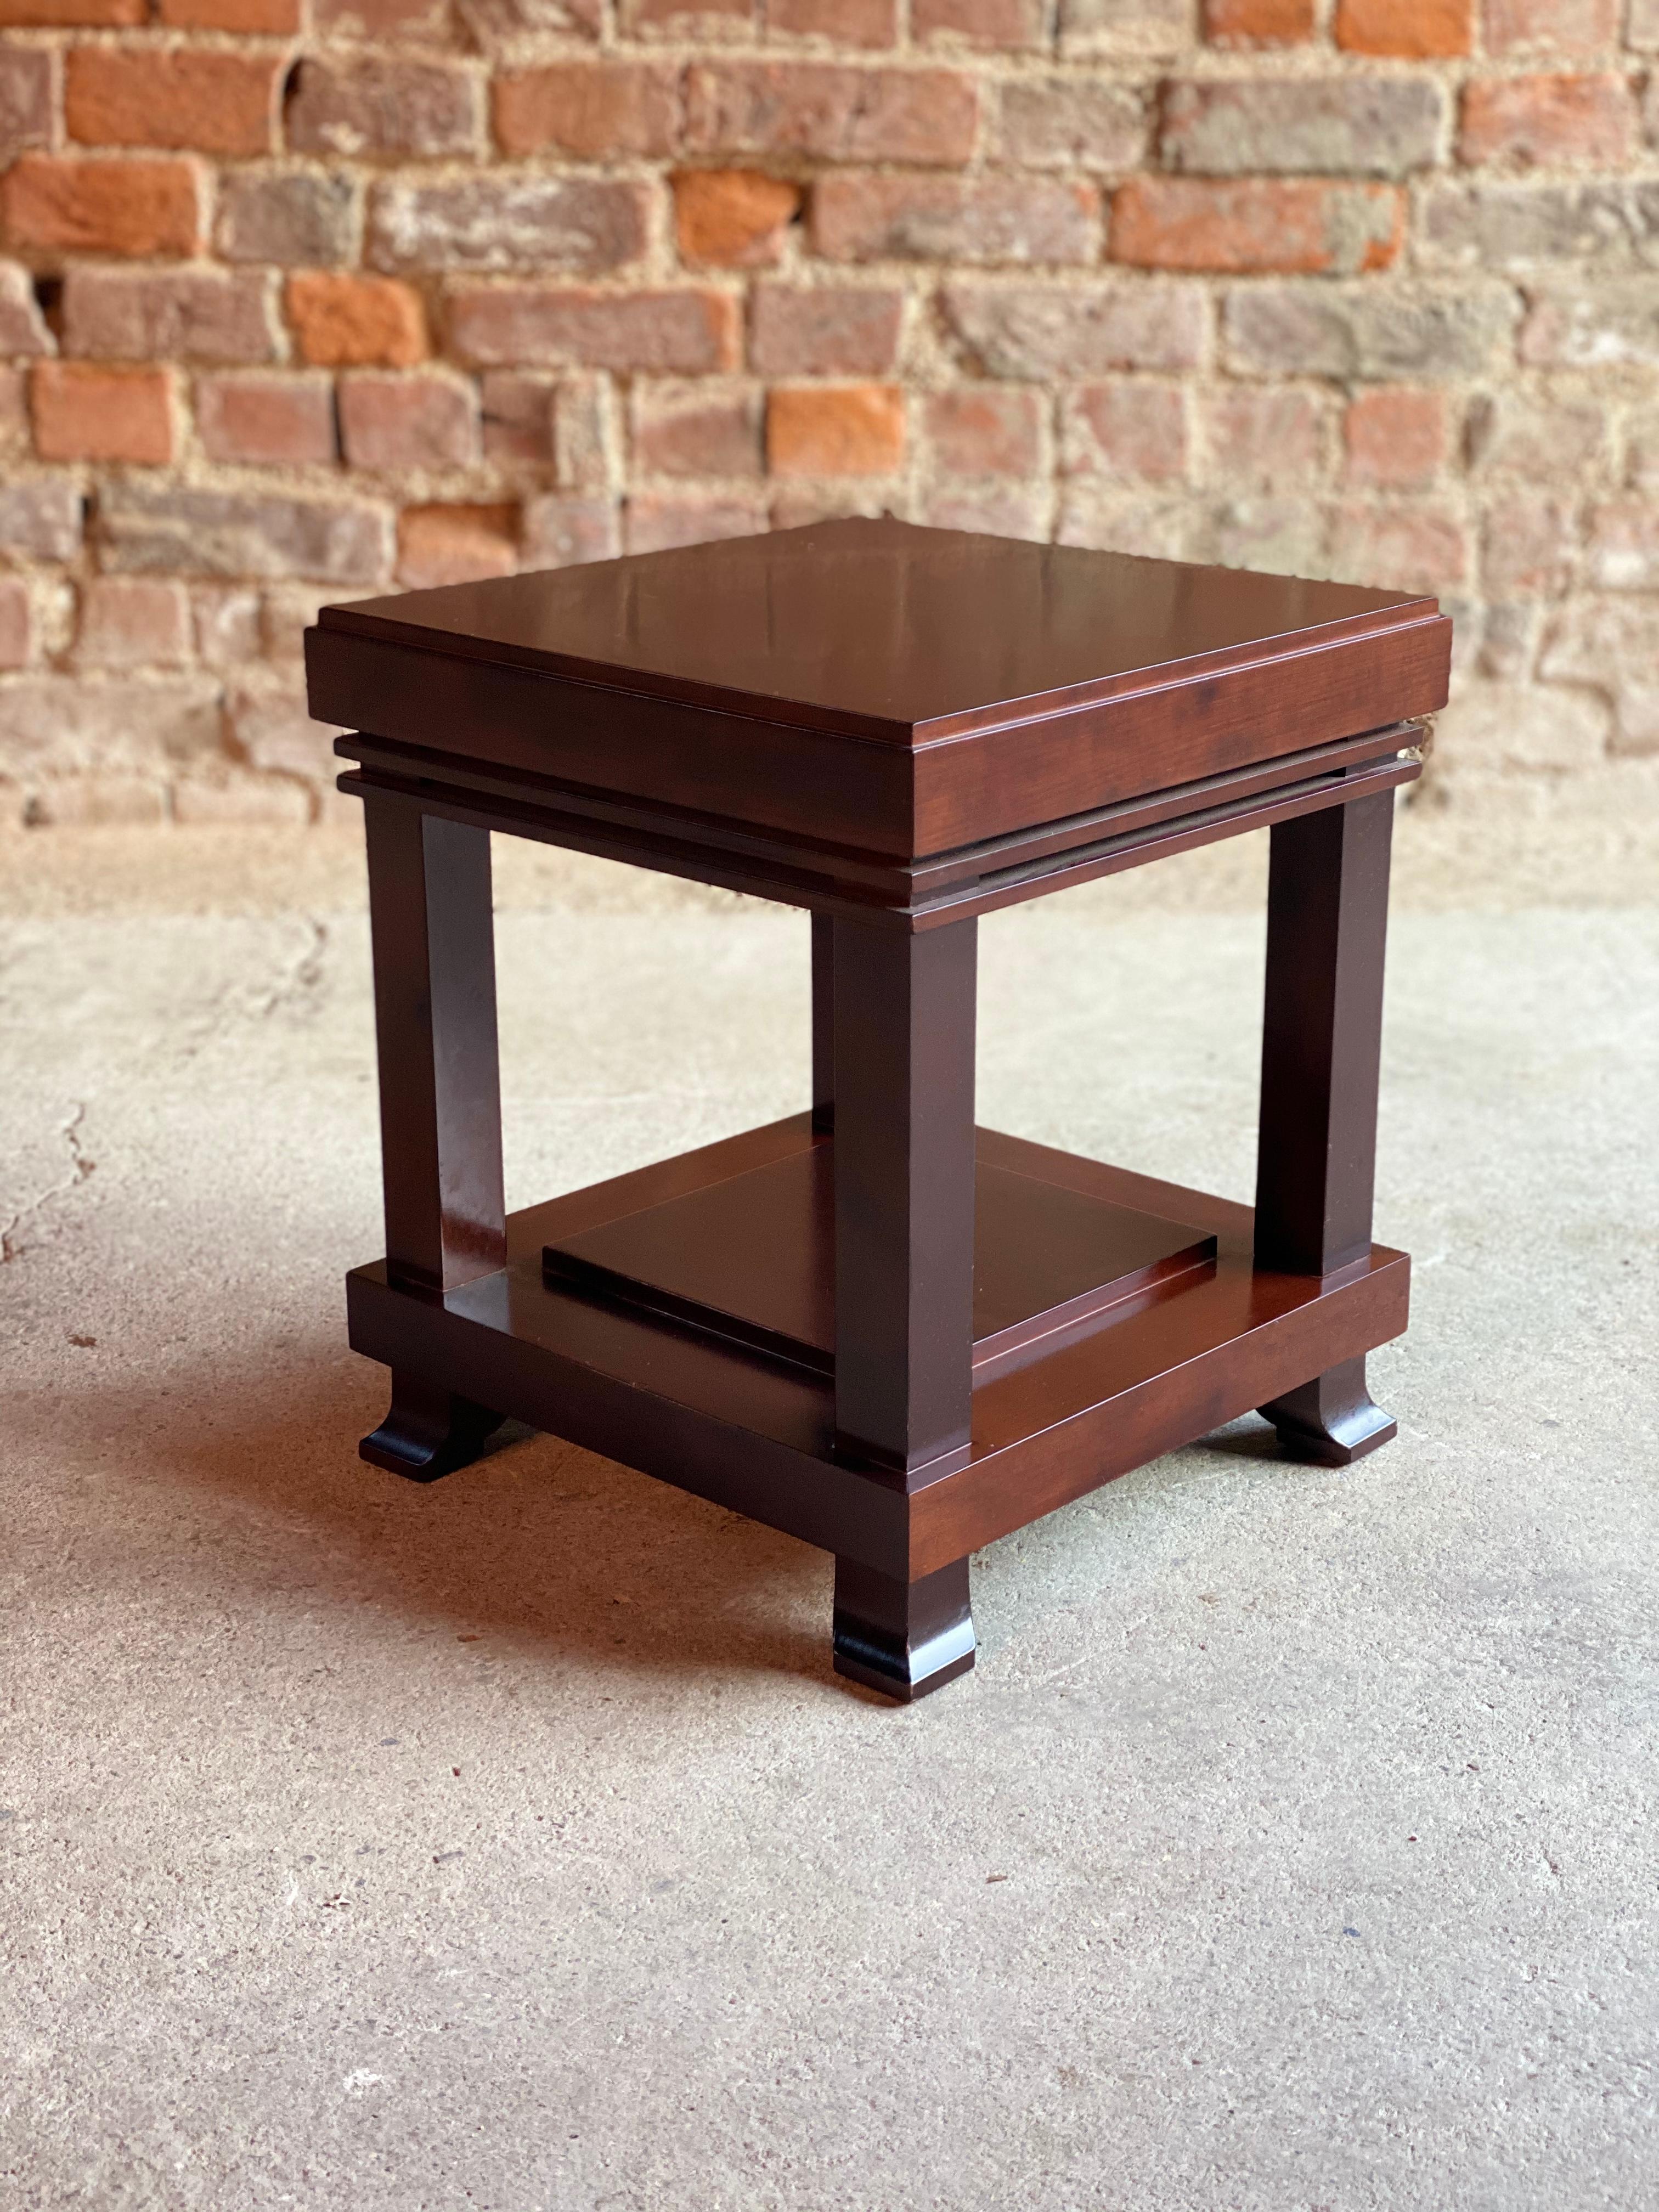 Frank Lloyd Wright ‘Robie’ Side Tables or Stools Manufactured by Cassina 1